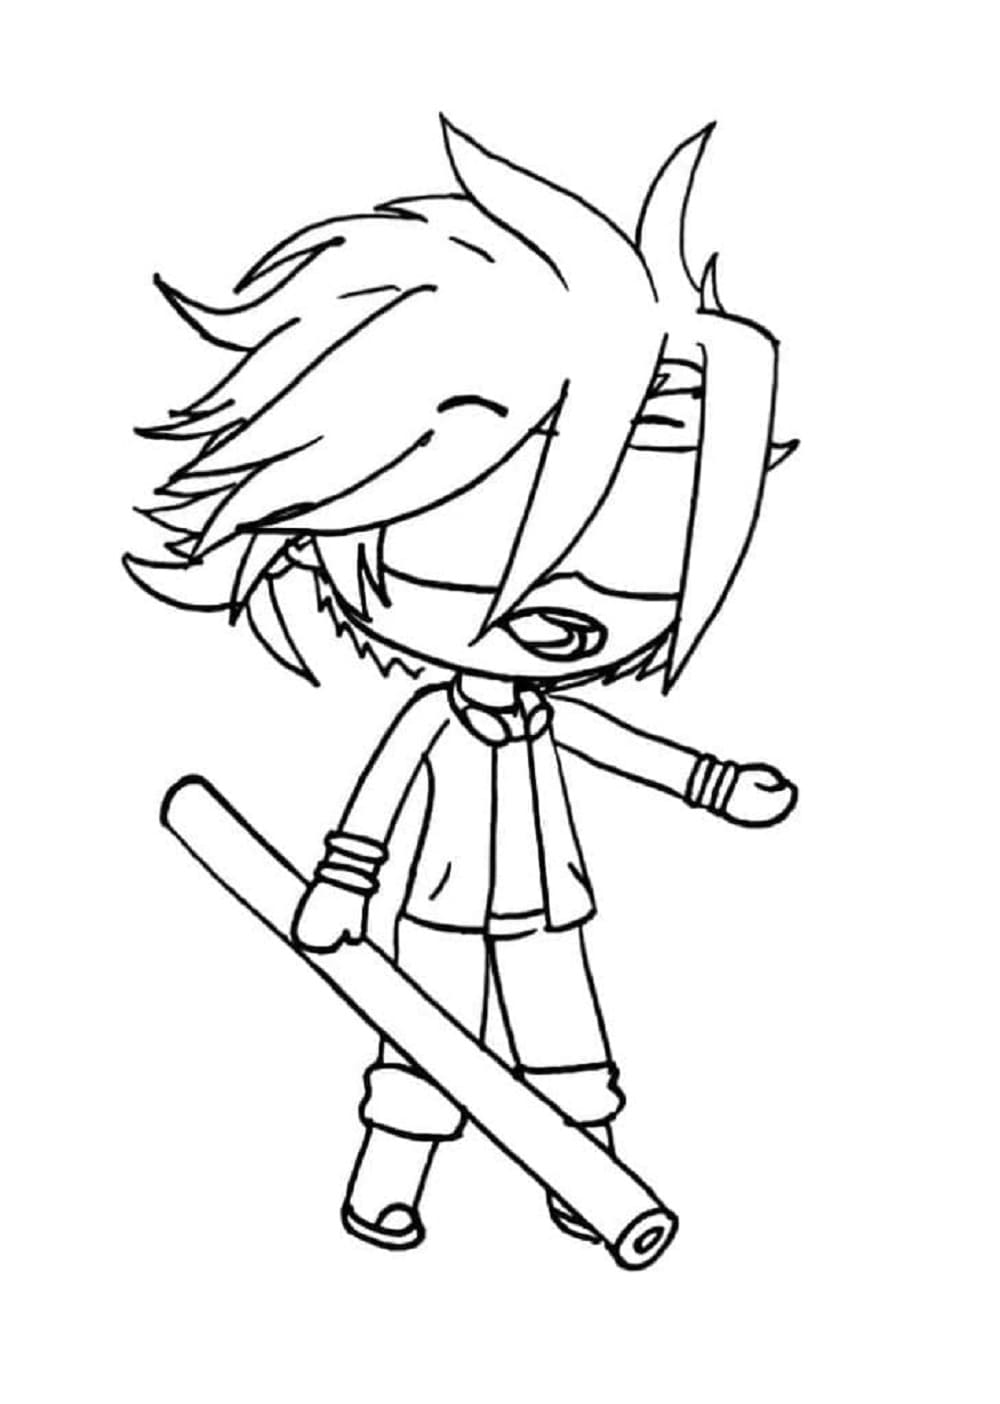 Printable Cool Boy in Gacha Life Coloring Page